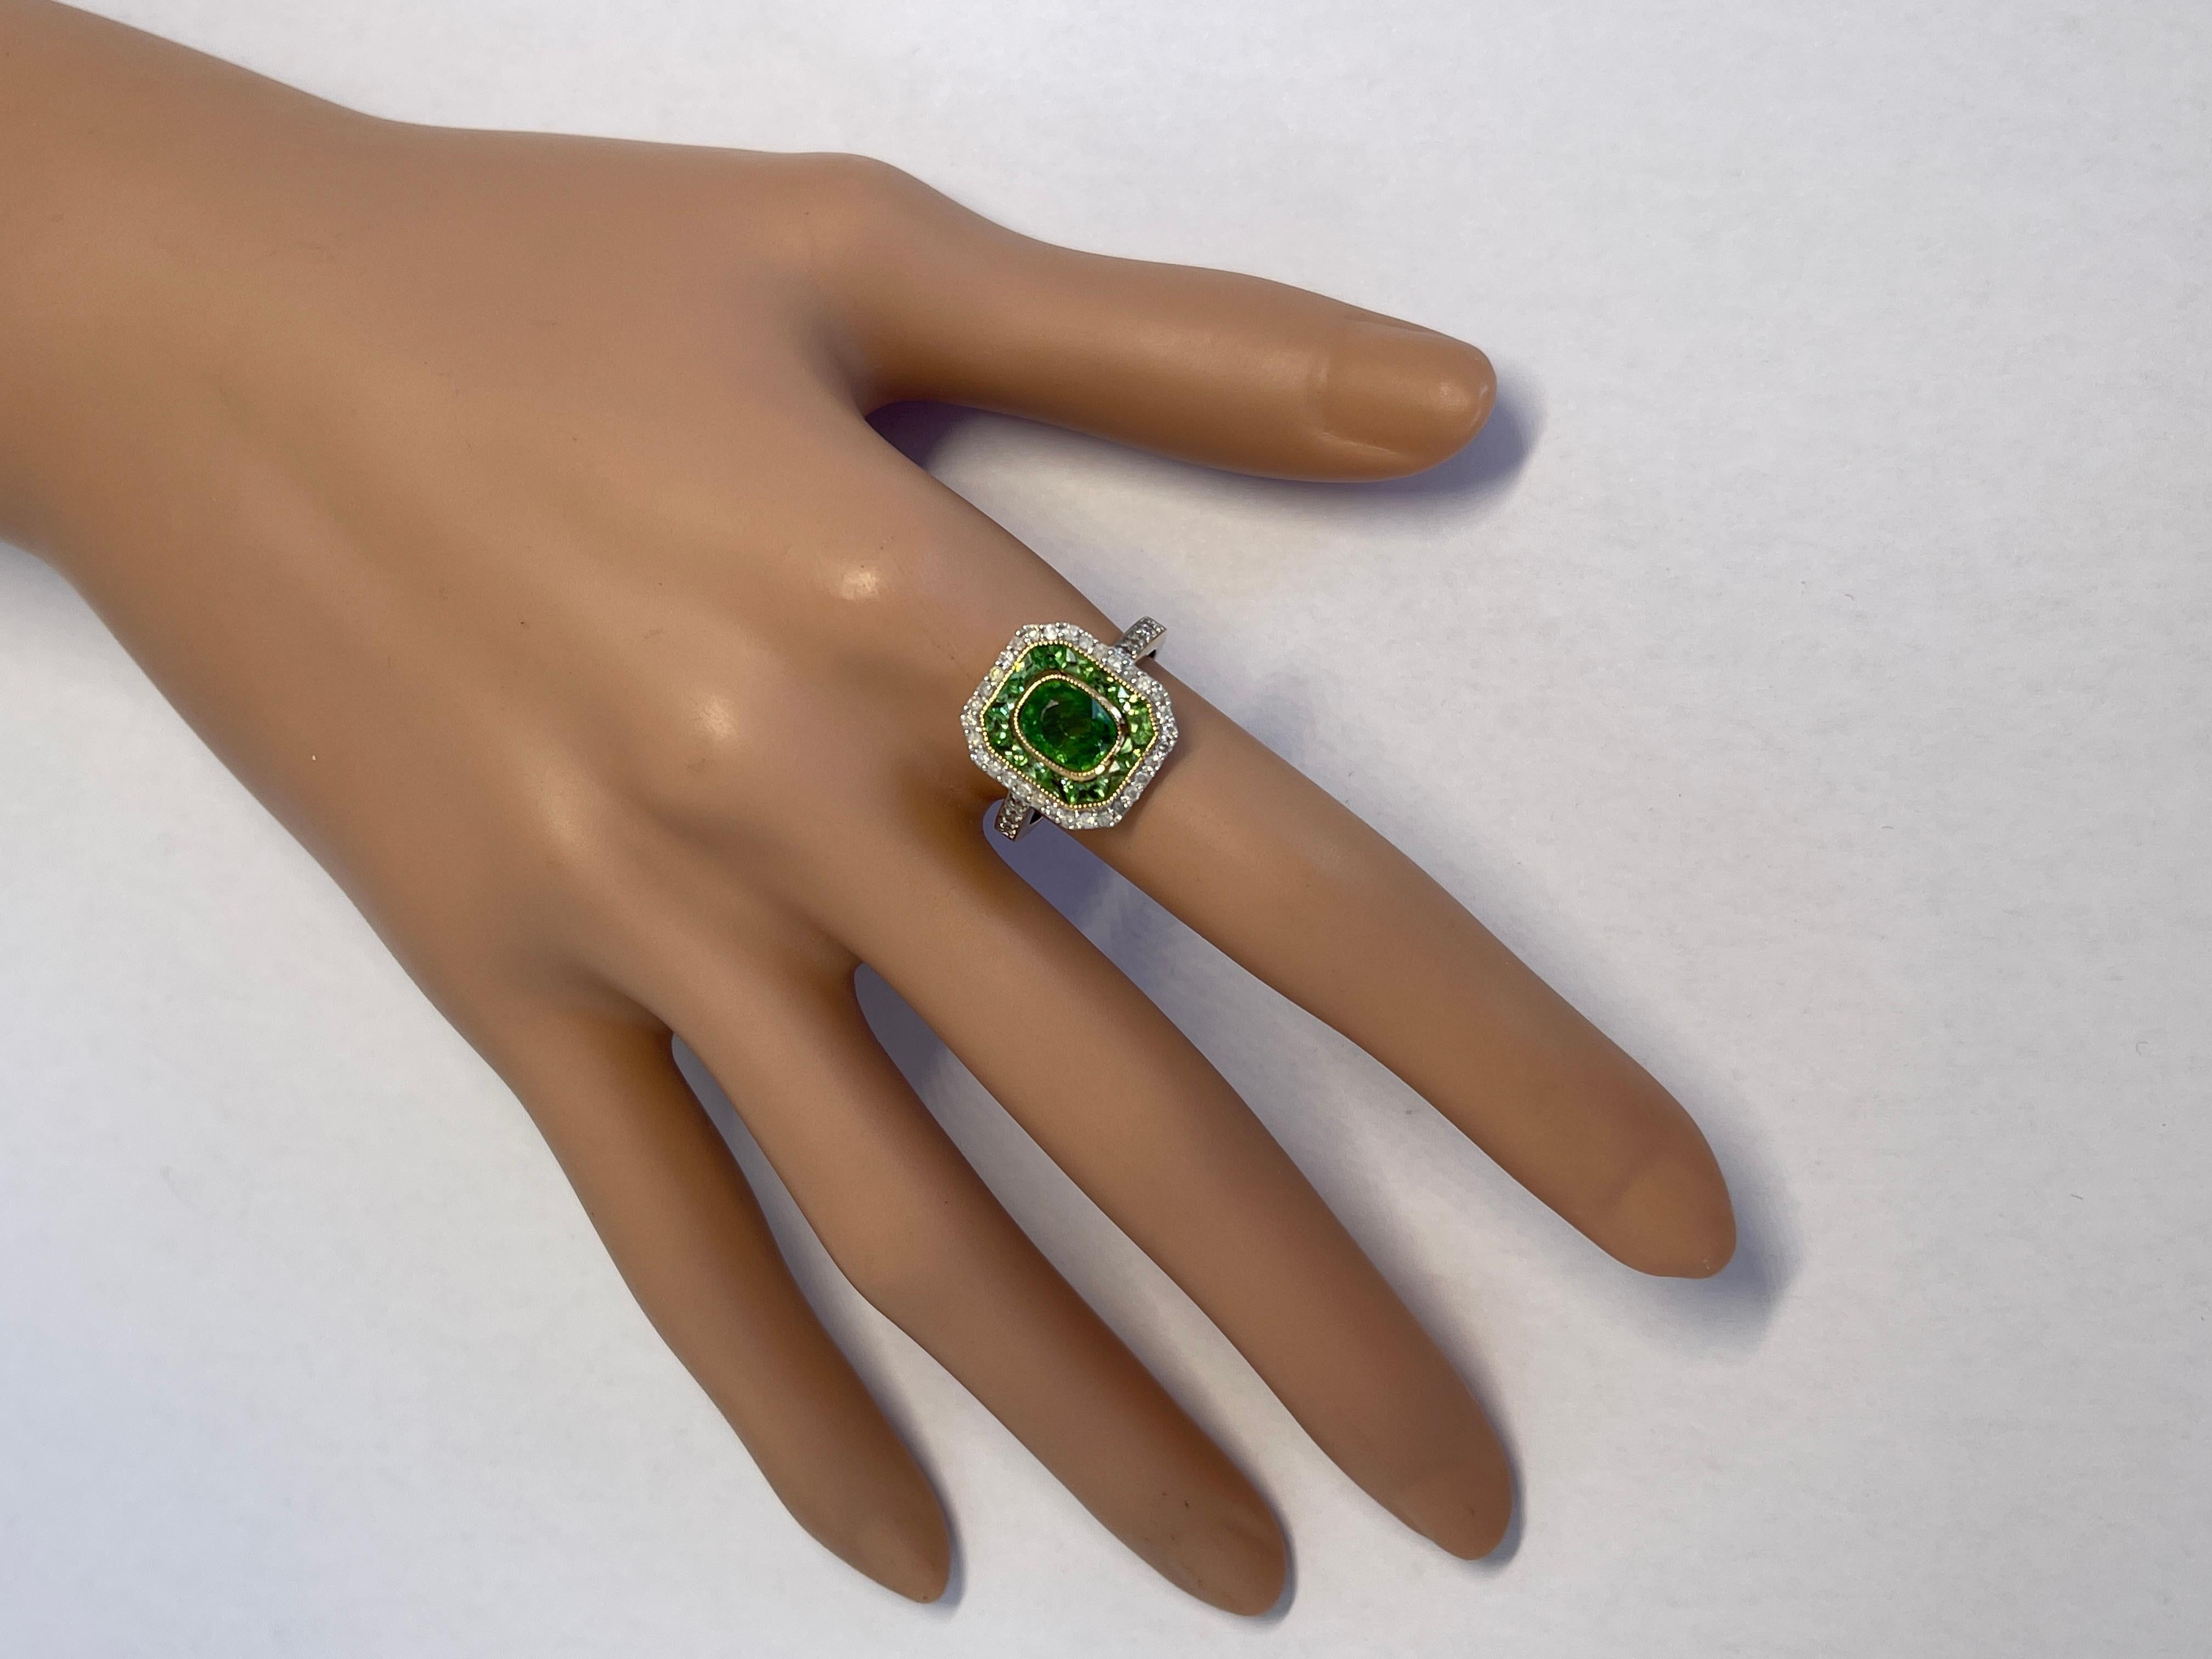 Rare Natural 1ct Carat Tsavorite Garnet Diamond Ring Art Deco Style 9ct Gold In New Condition For Sale In Mona Vale, NSW